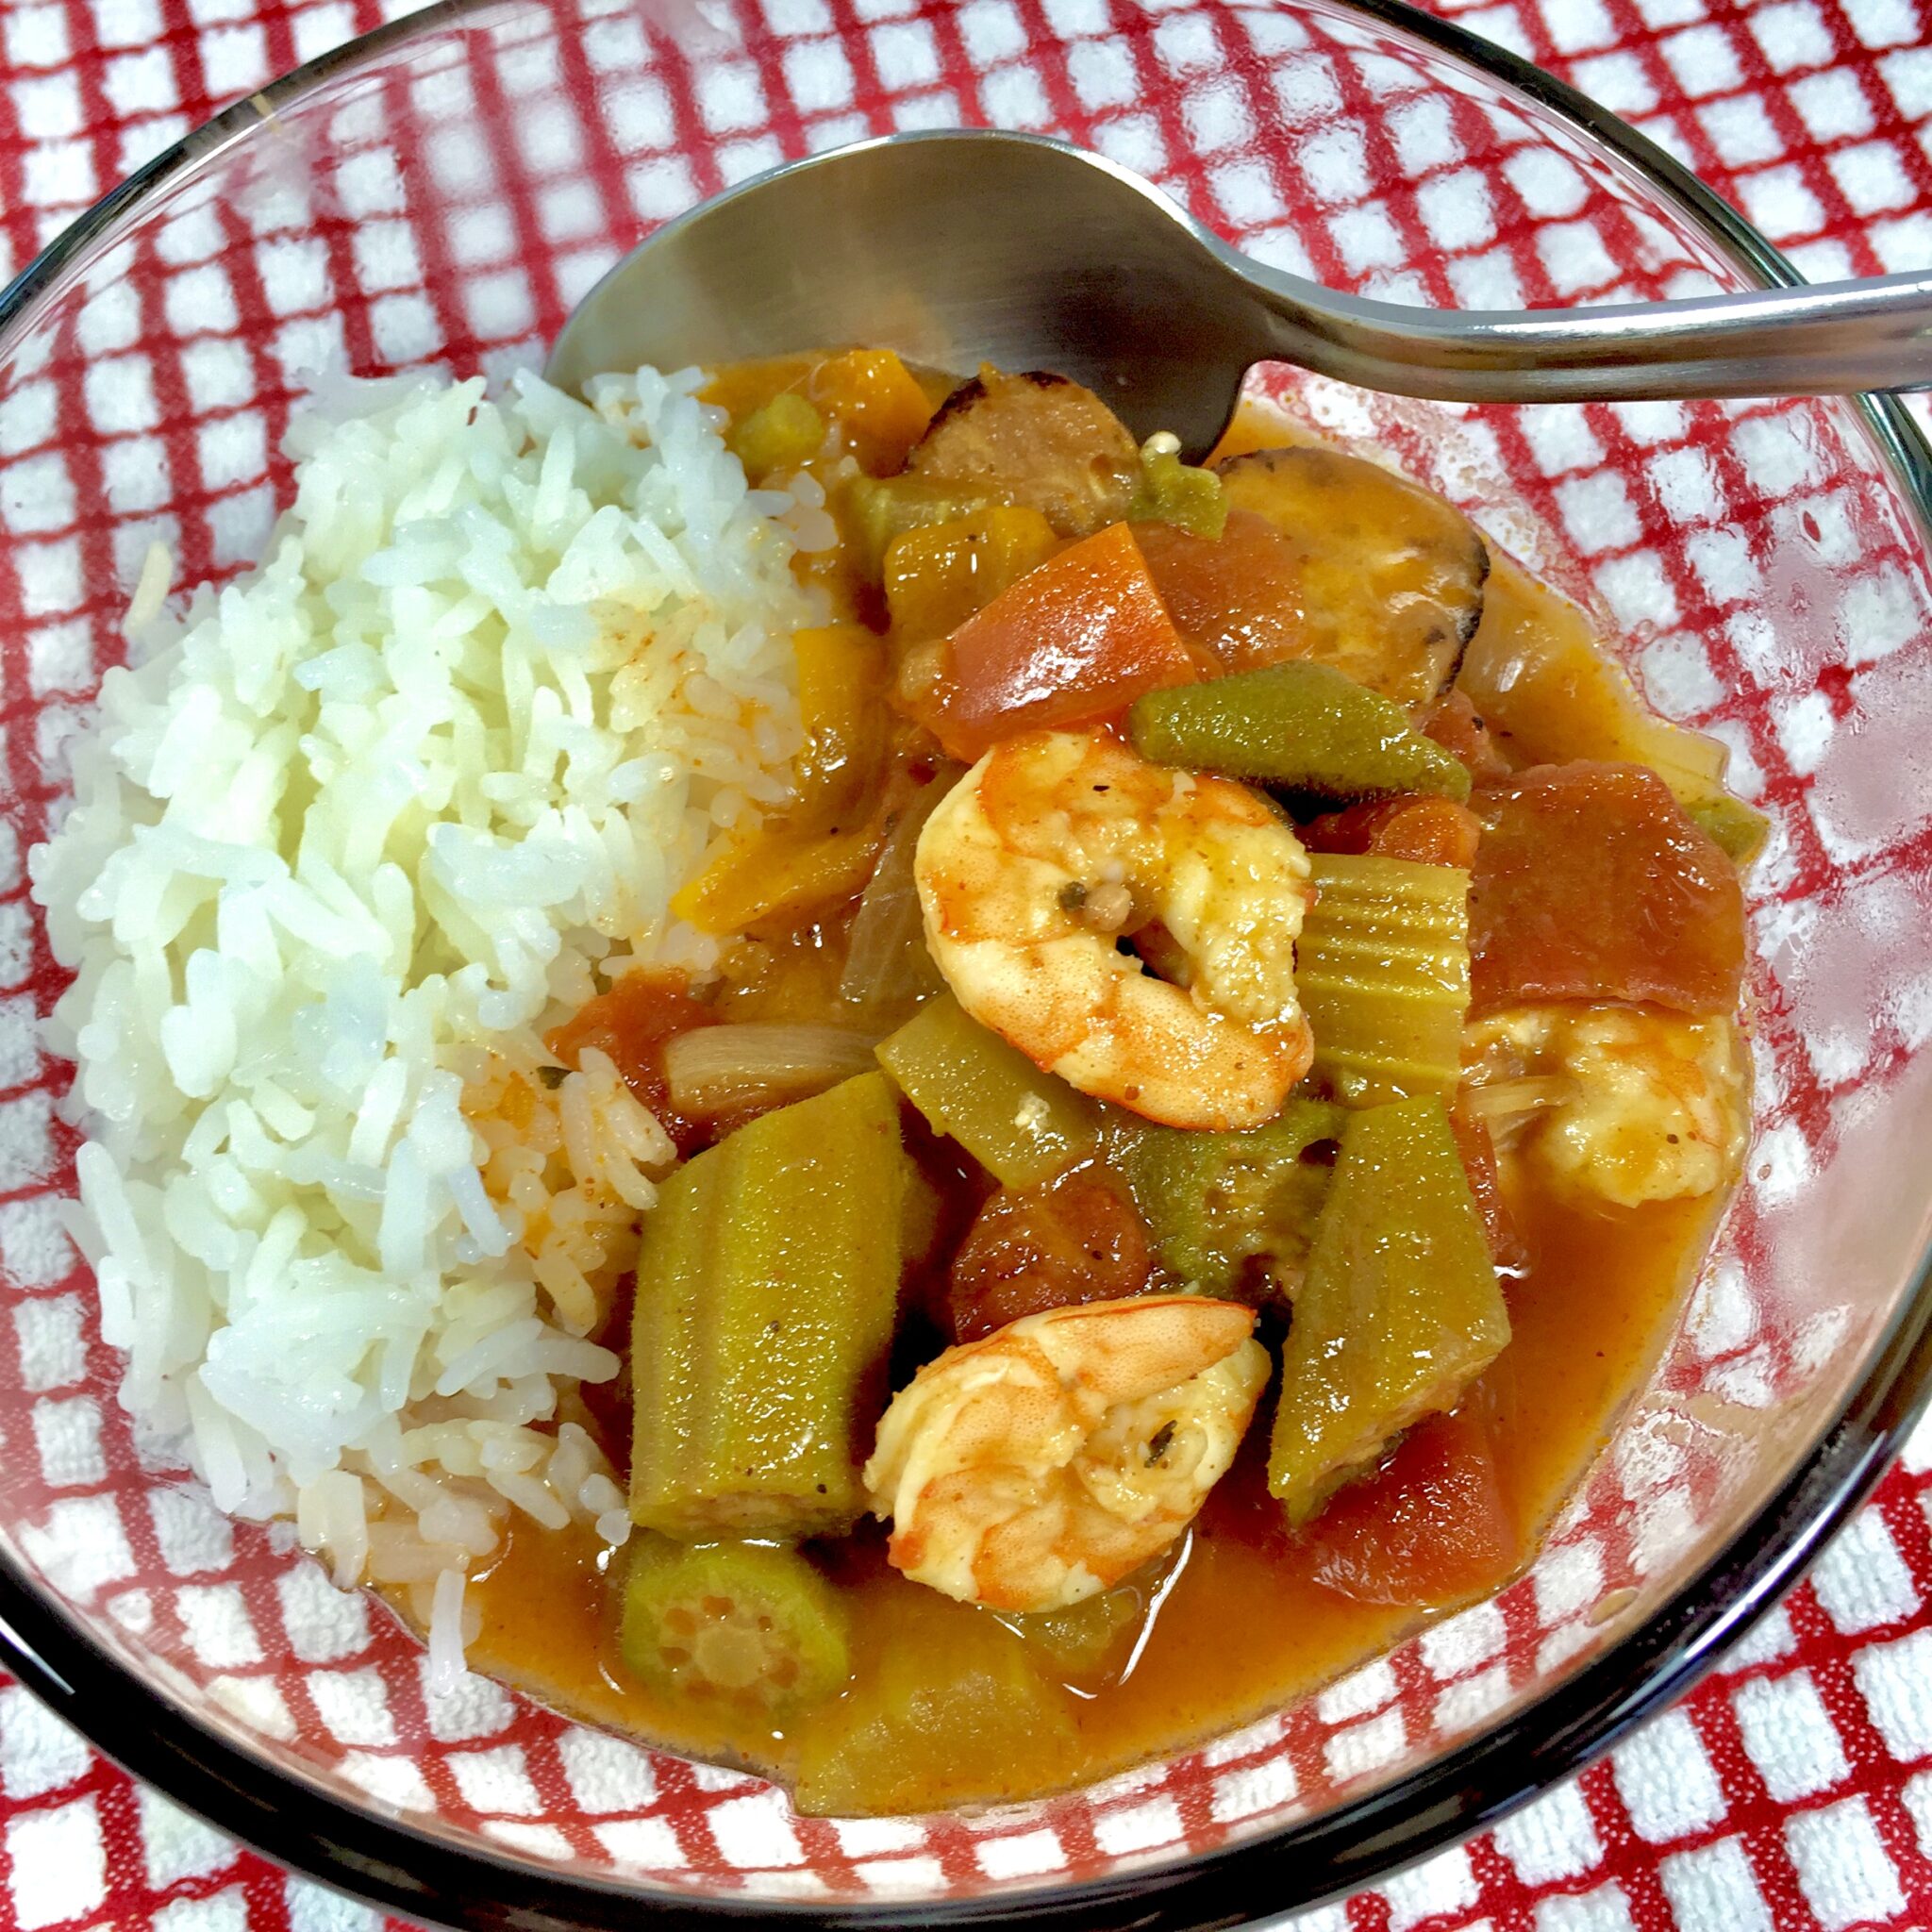 Lite Shrimp Gumbo in a clear bowl with a red and white checked towel